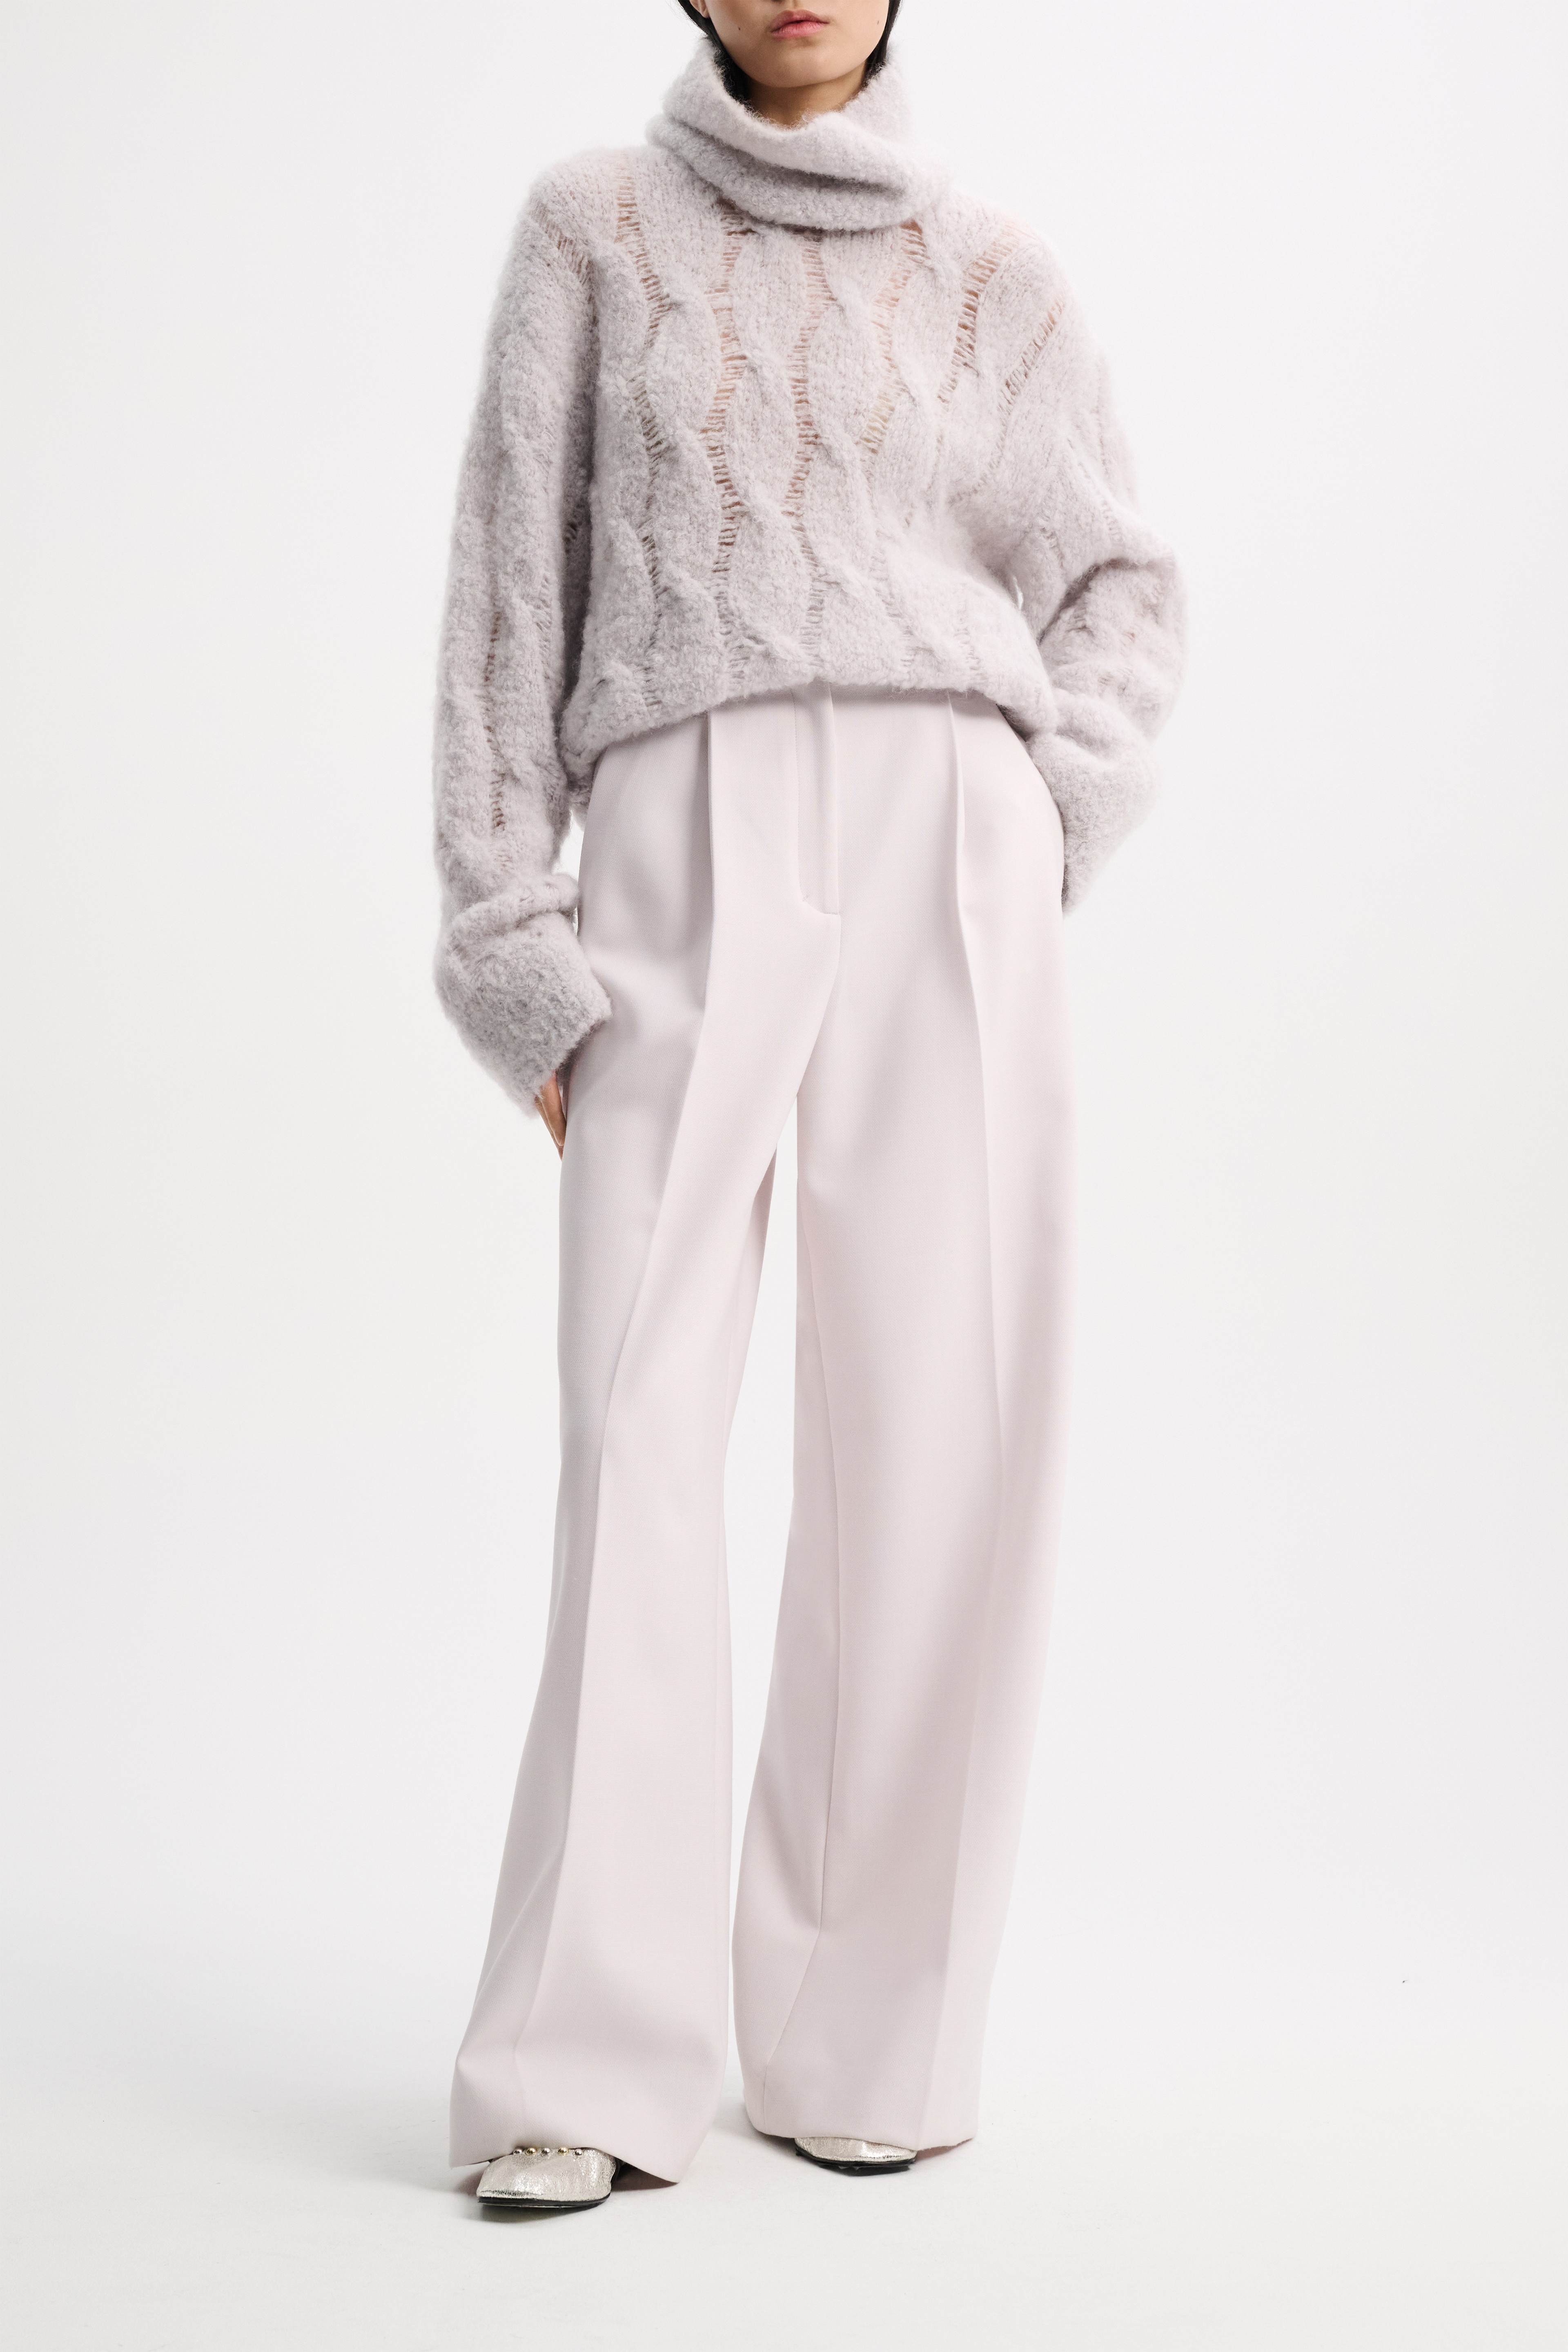 Dorothee Schumacher Mohair mix cable knit